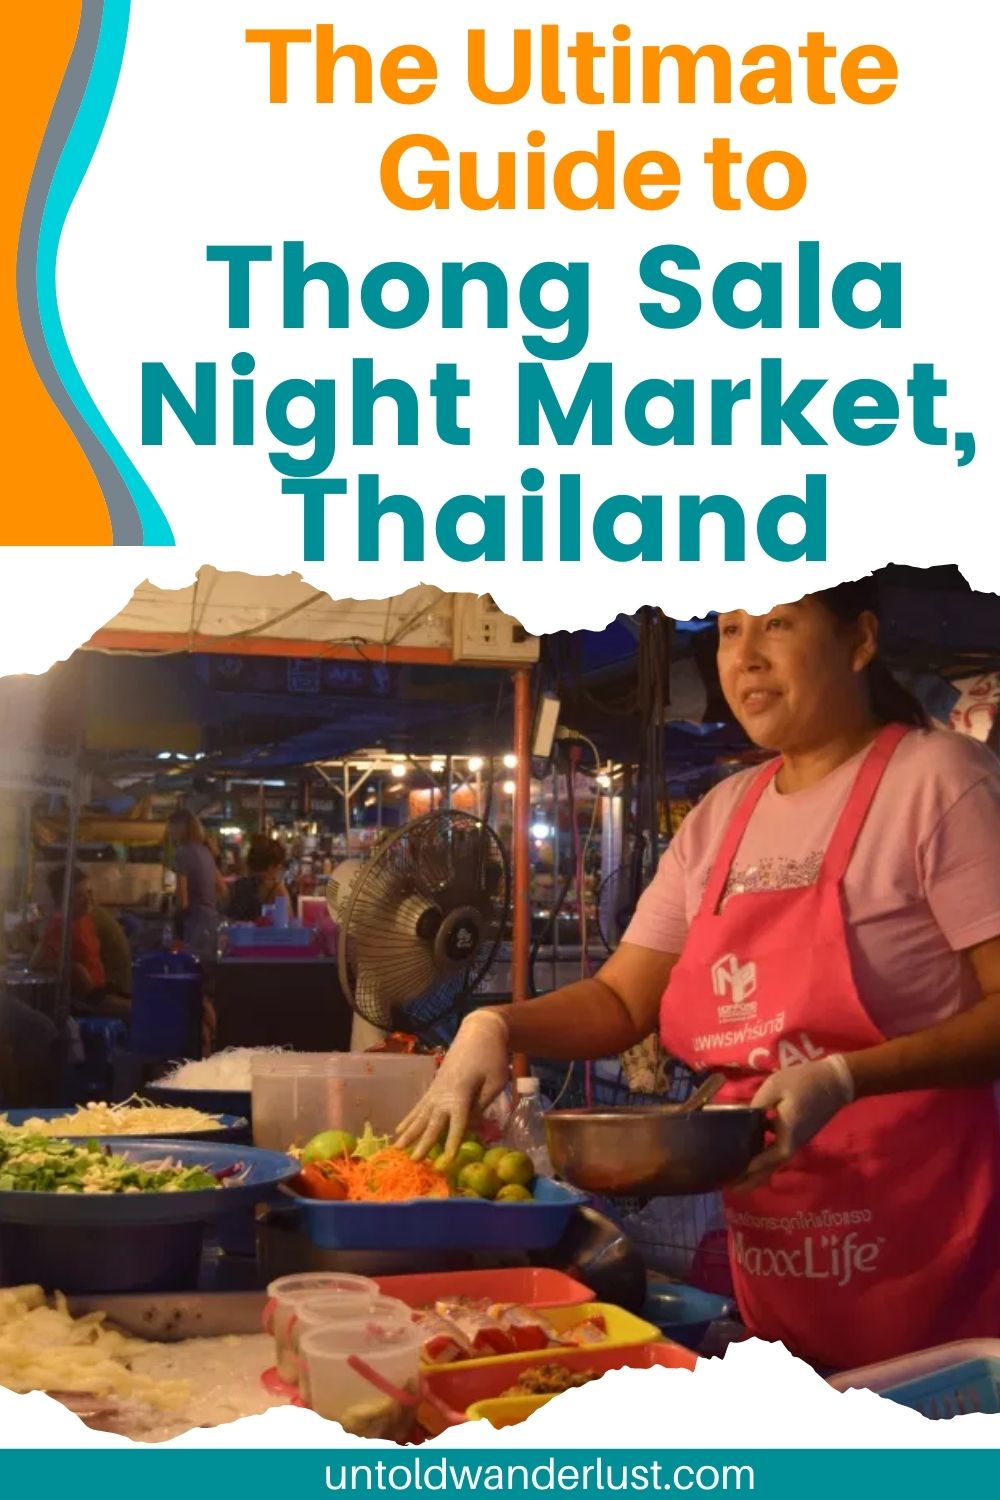 The Ultimate Guide to Thong Sala Night Market, Thailand